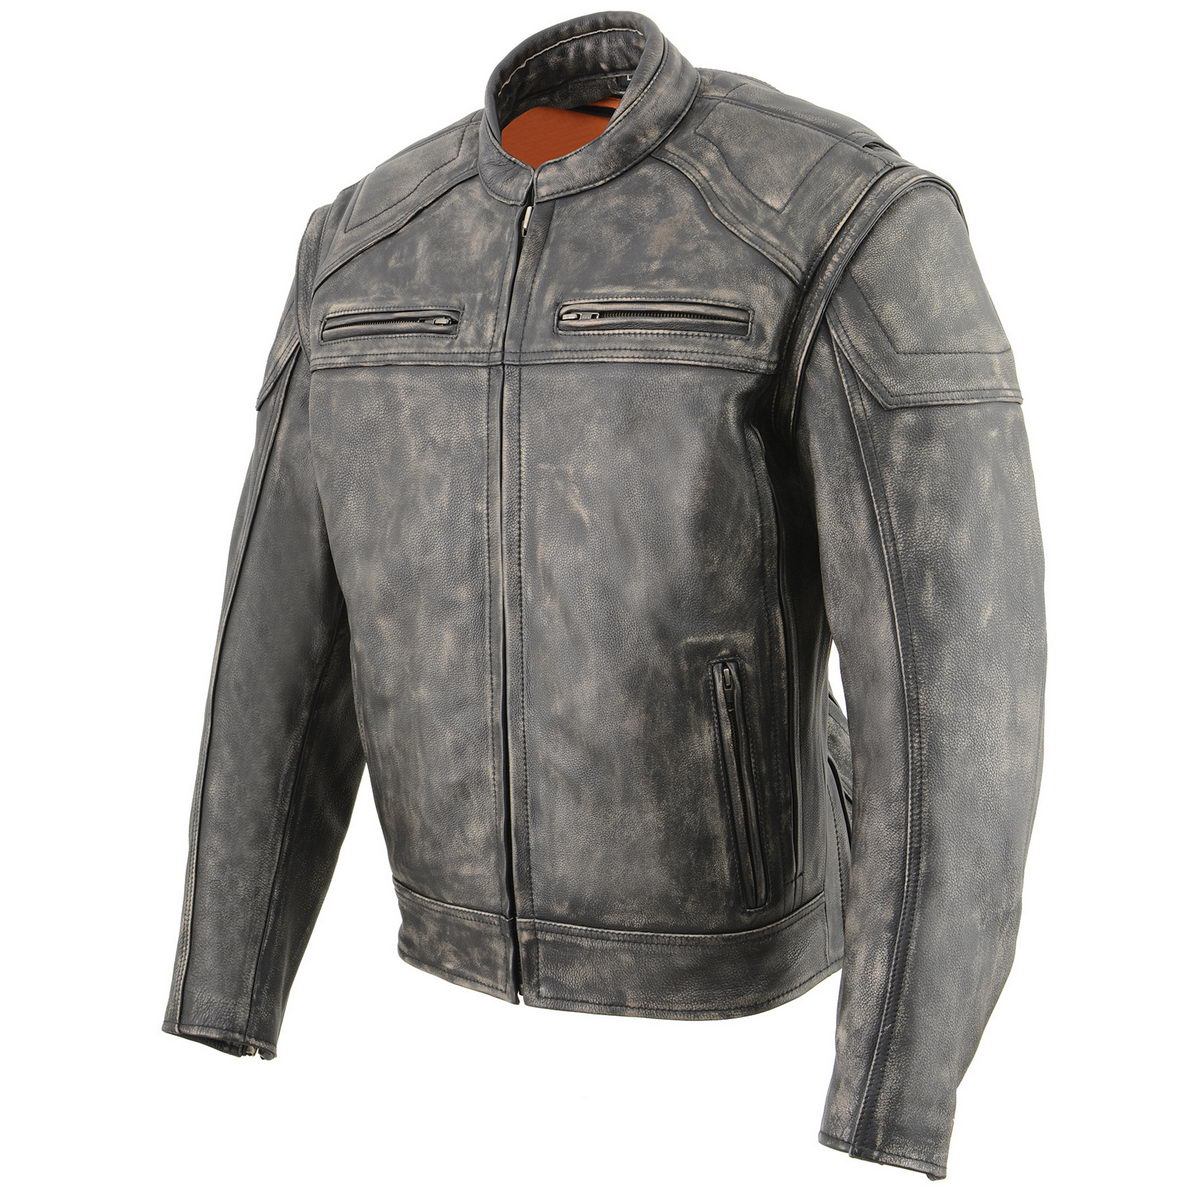 Milwaukee Leather MLM1509 Men's Distress Brown ‘2 in 1’ Leather Jacket with Zip-Off Sleeves